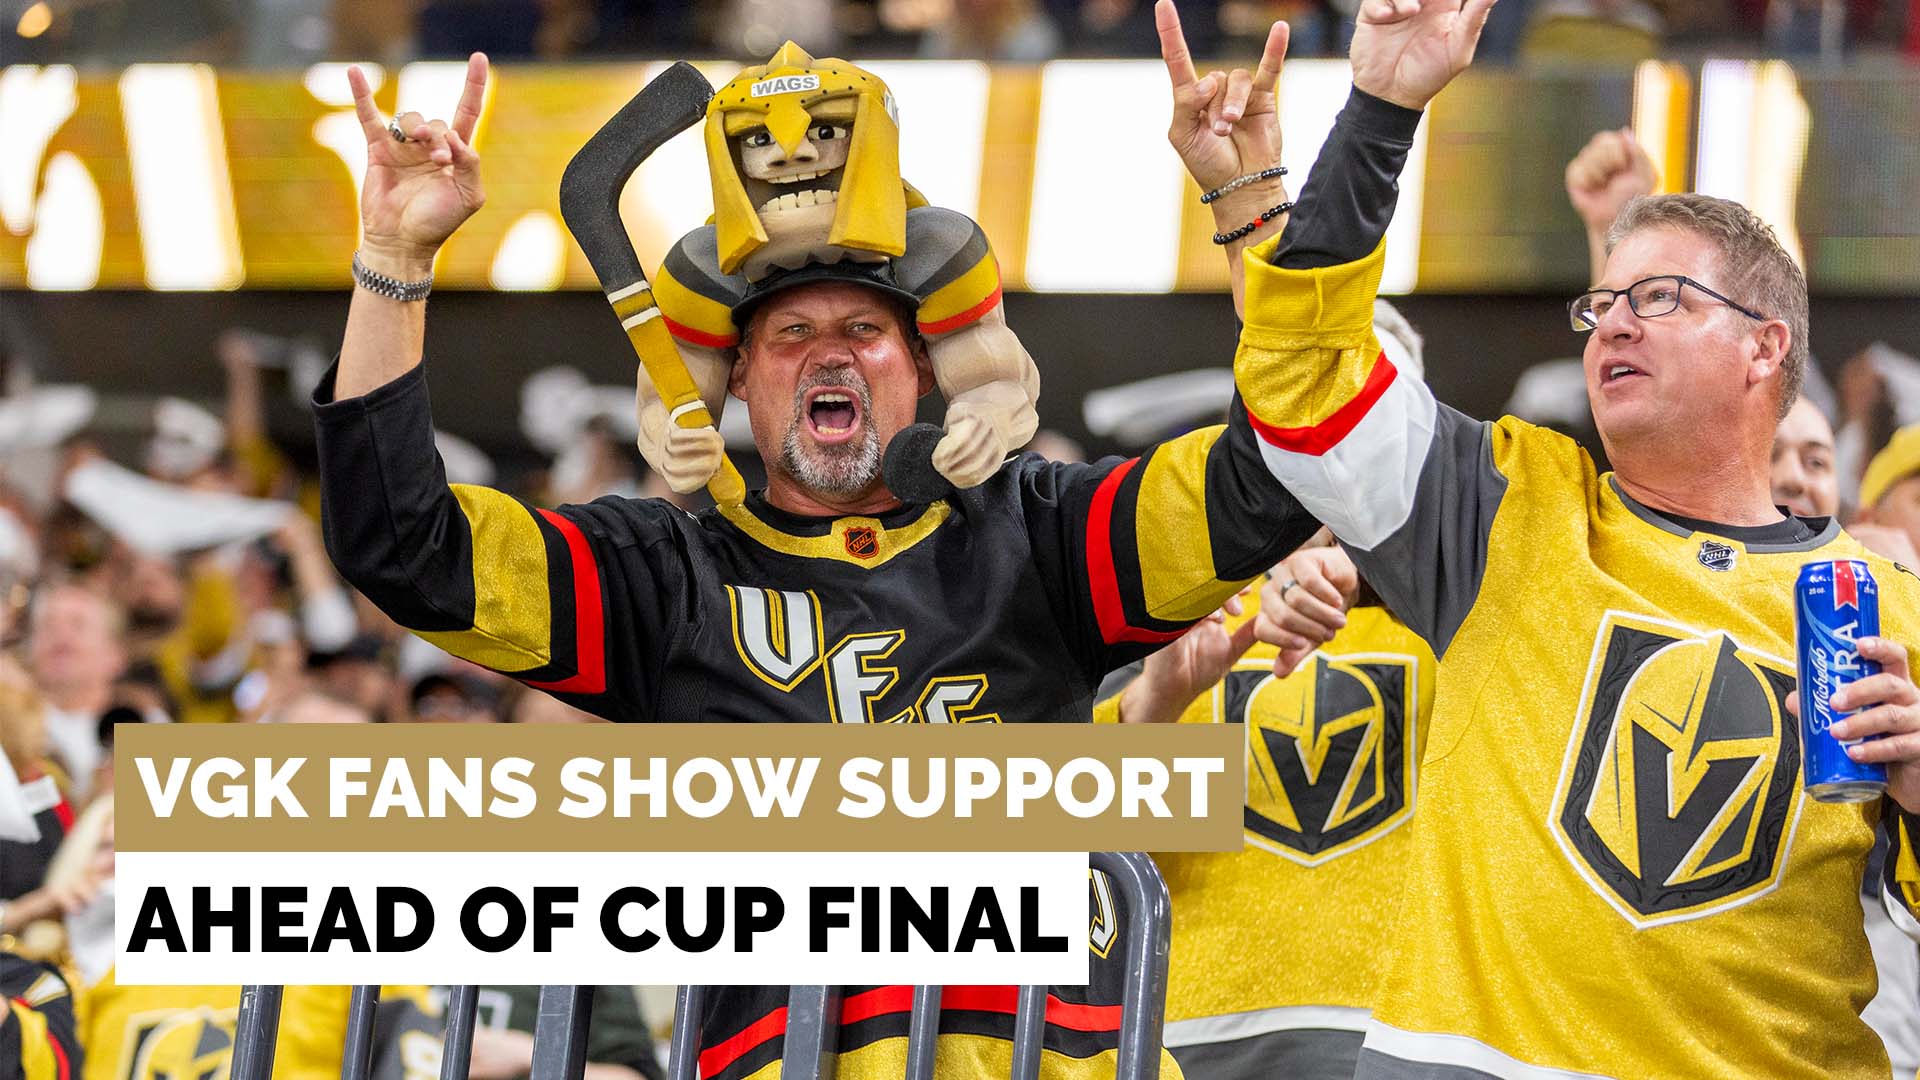 VGK Fans Show Support Ahead of Stanley Cup Final